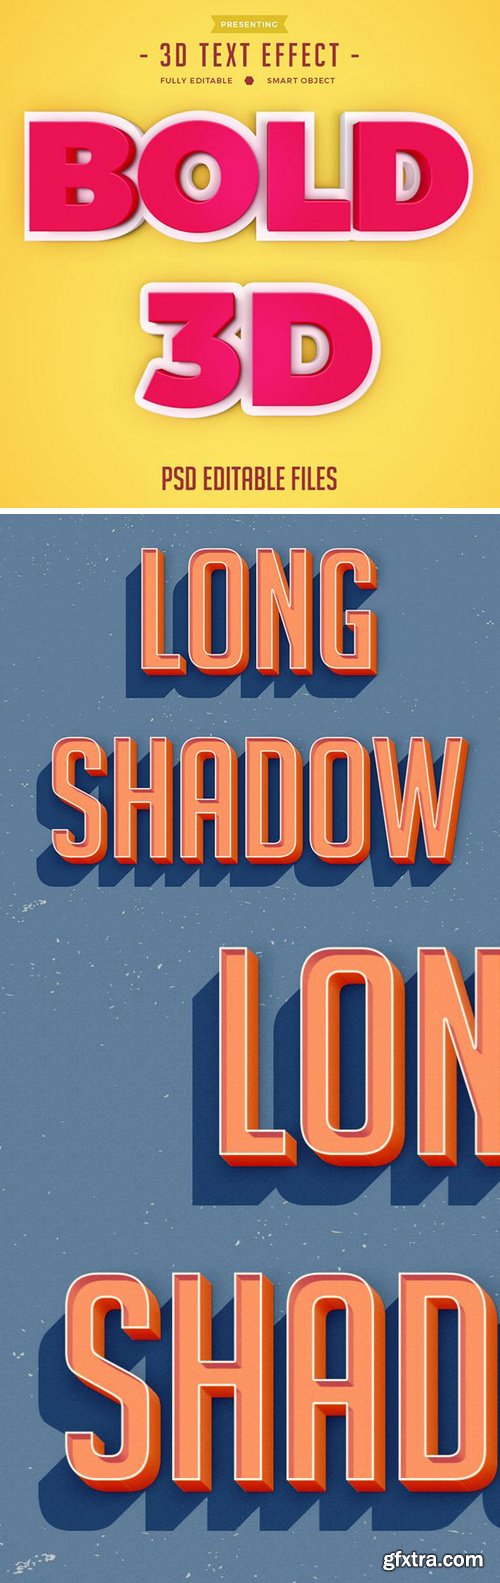 3D Bold & Long Shadow Text Effects for Photoshop